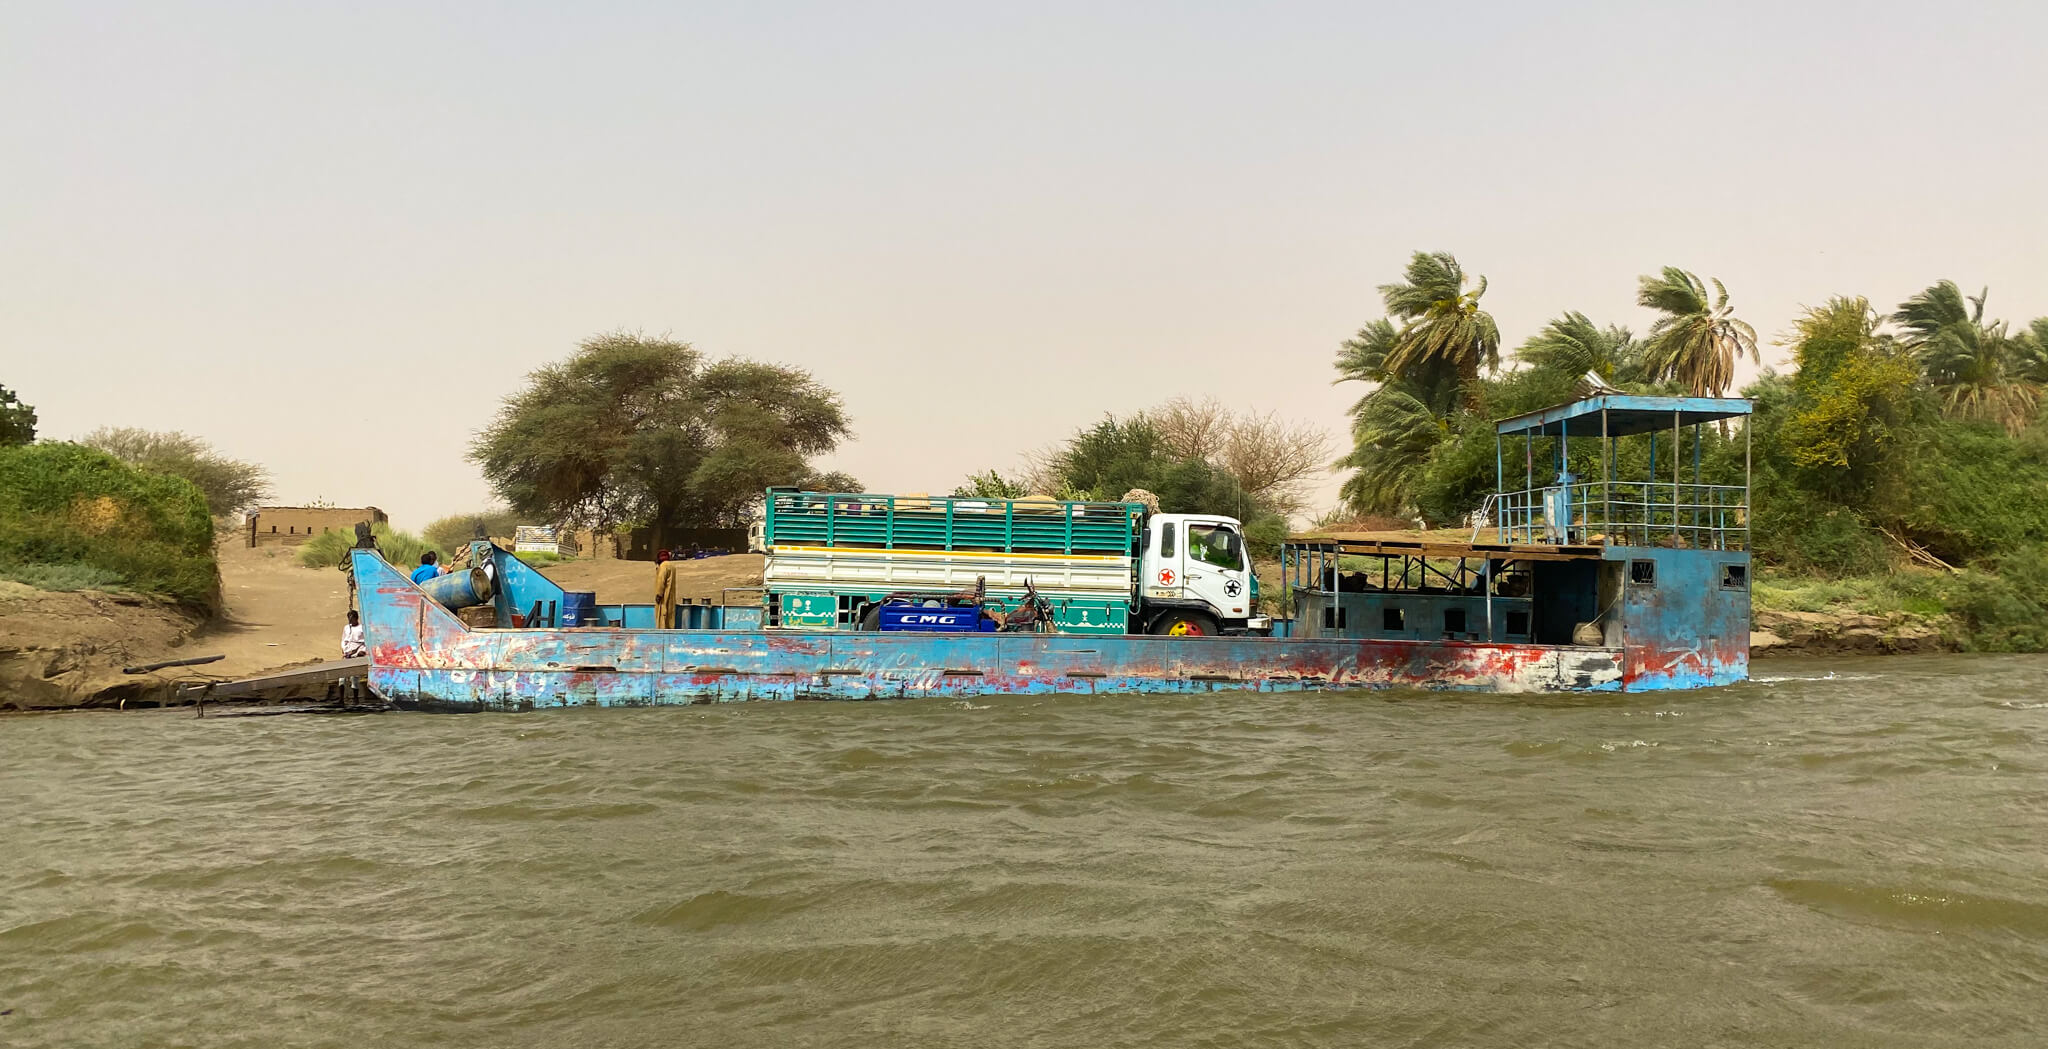 A blue ferry docked at the bank of the Nile on Sai Island.